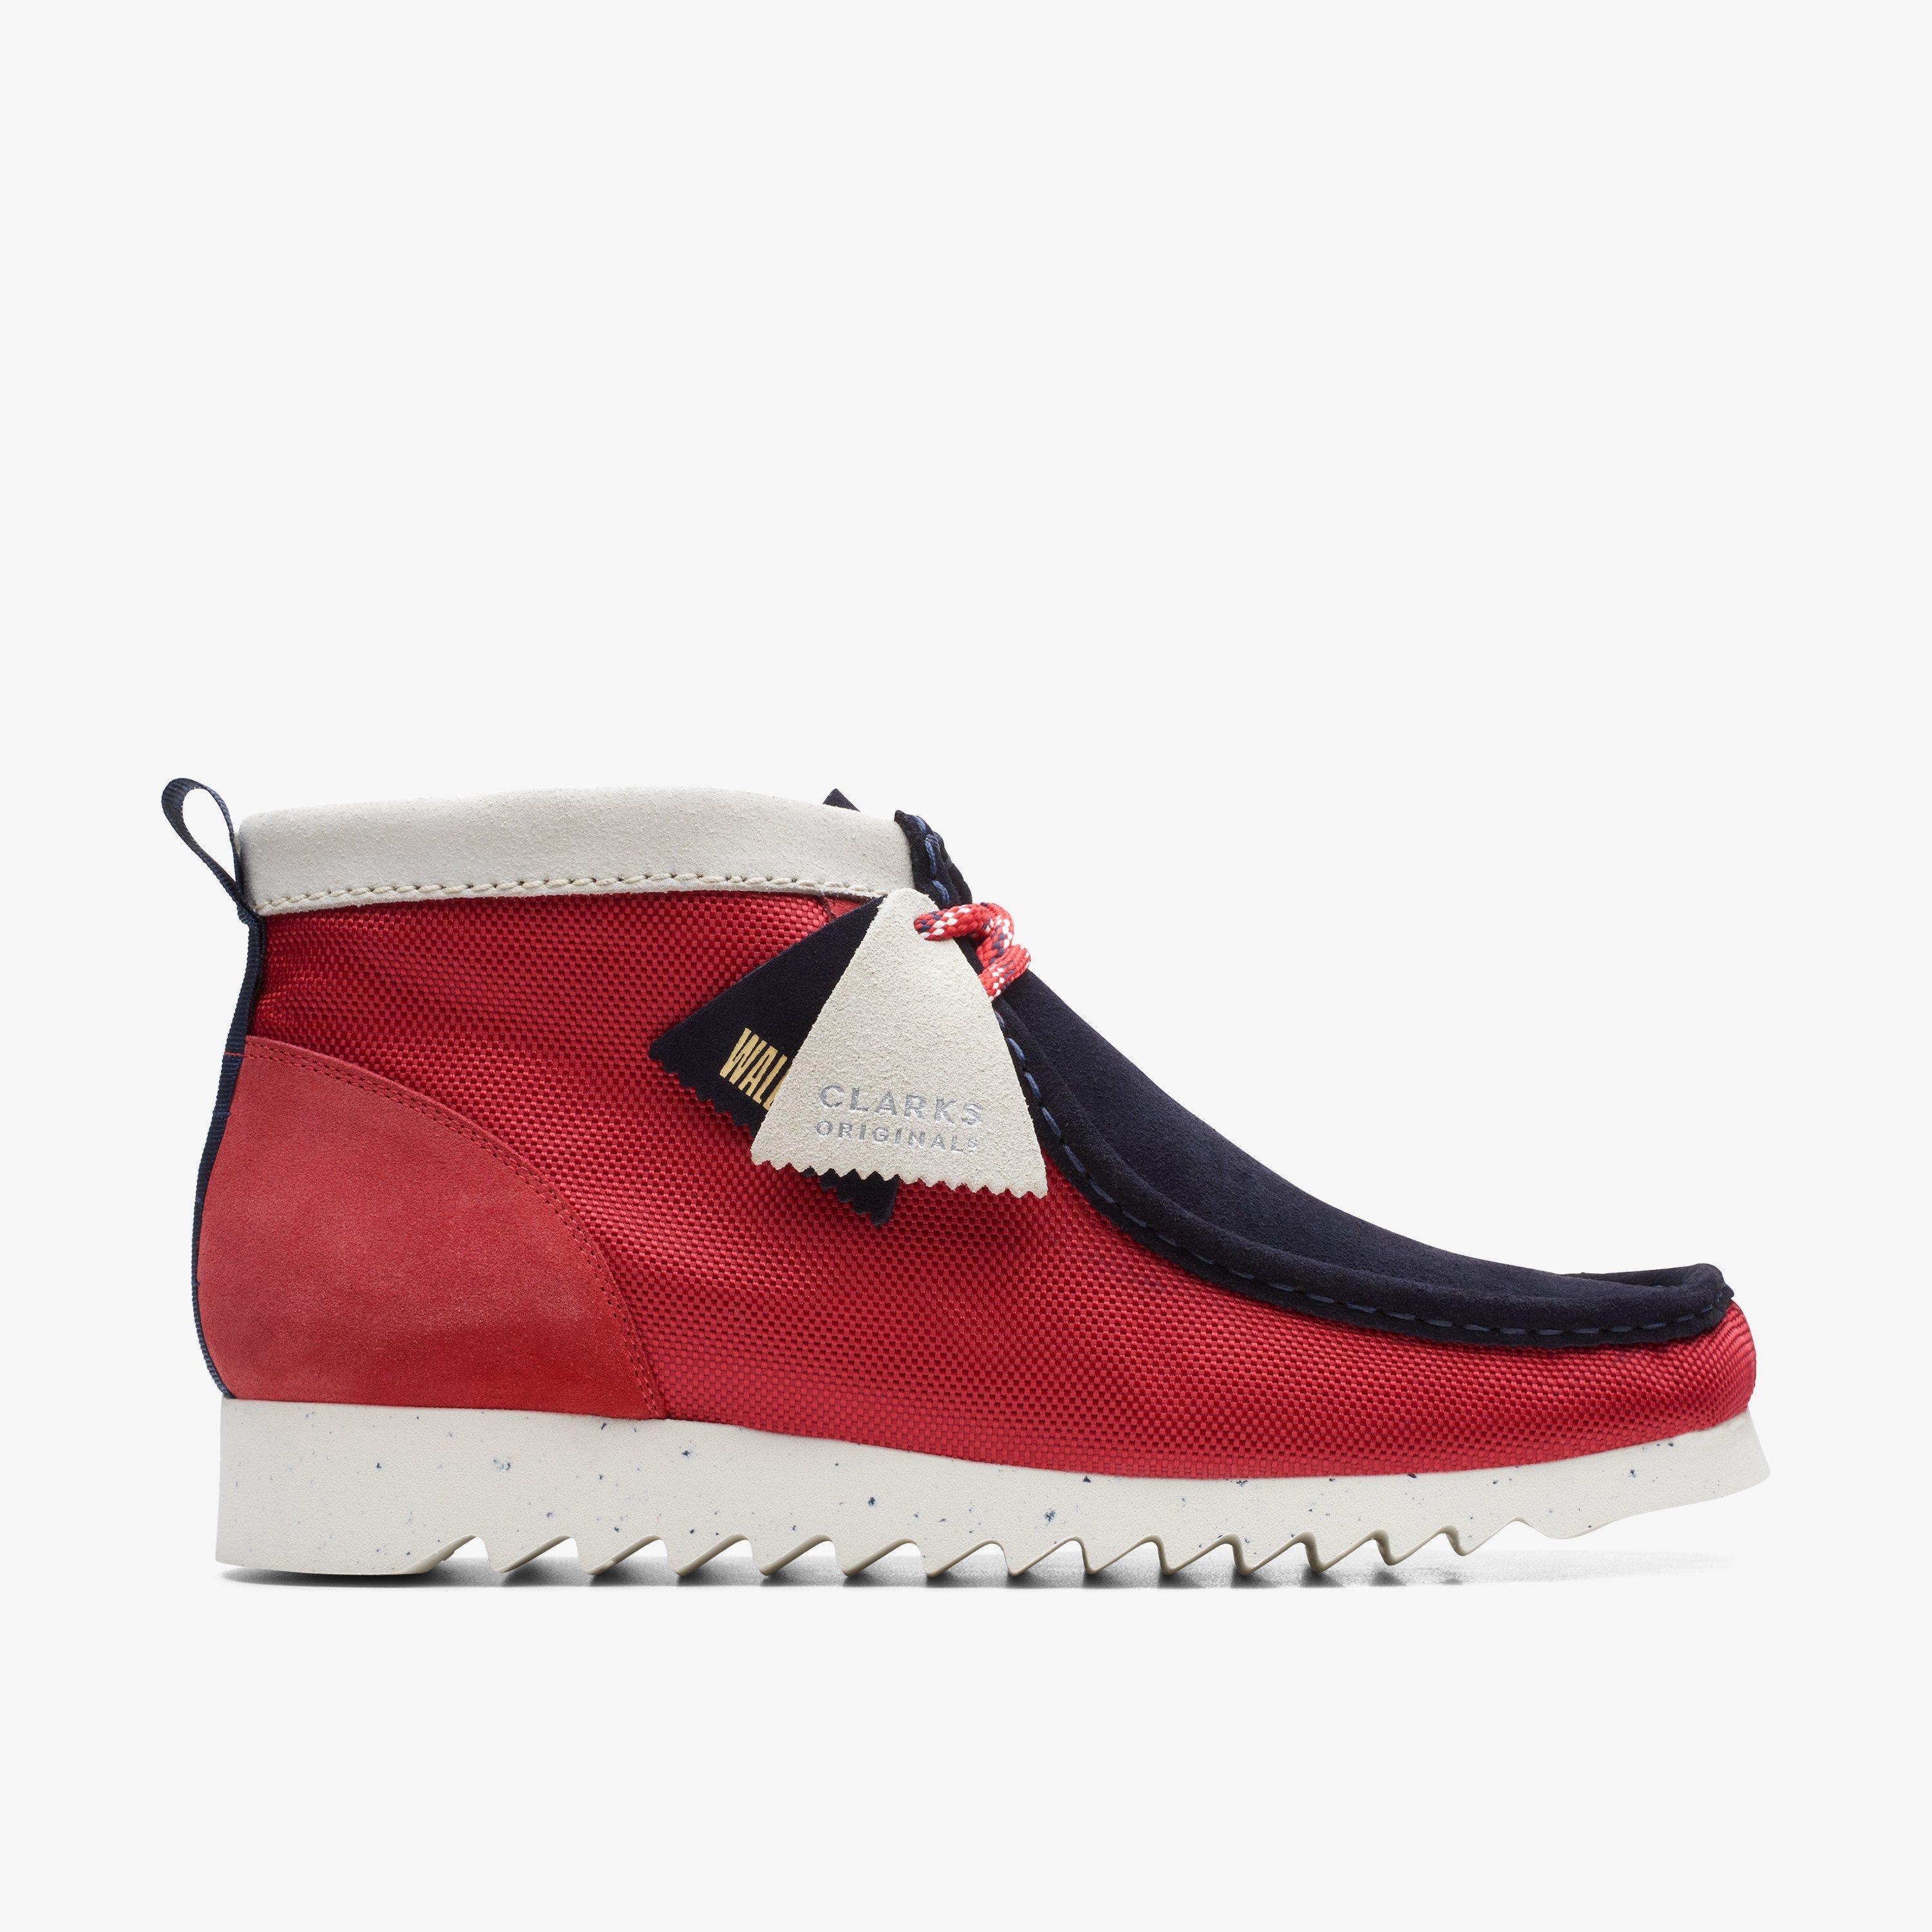 MENS Wallabee FTRE Red/Ink Boots | Clarks CA